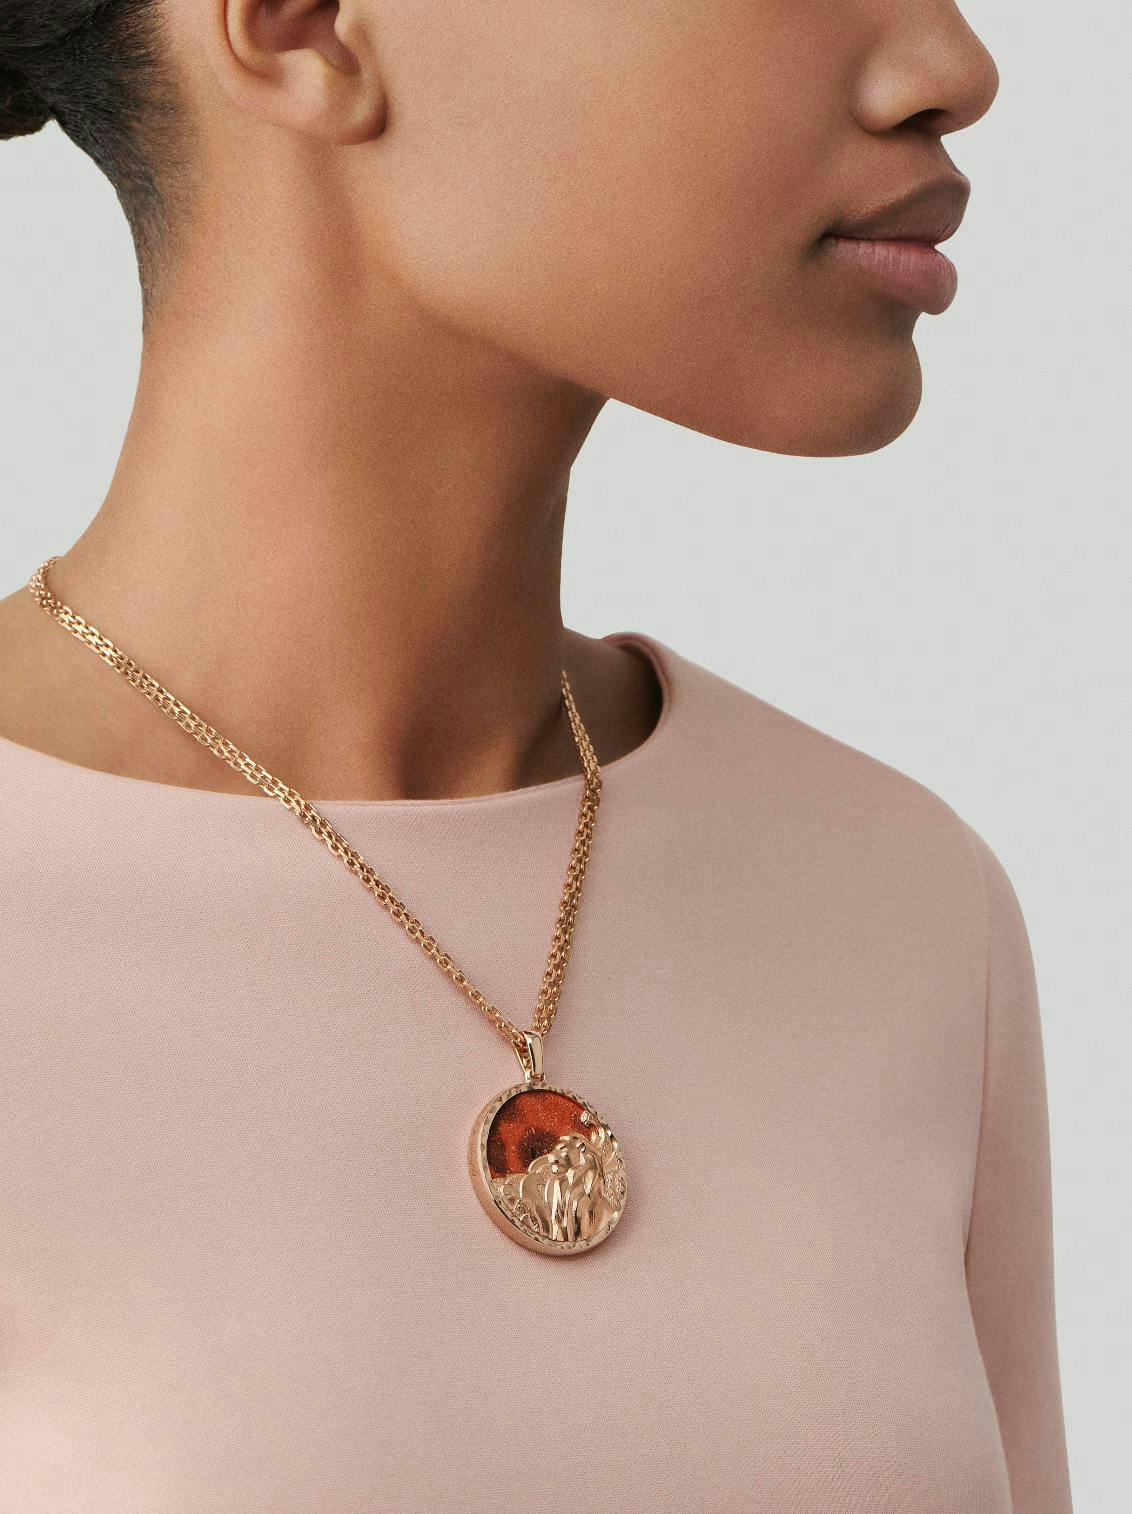 Van Cleef & Arpels’ Zodiaque long necklace Leonis (Leo) in rose gold and red jasper